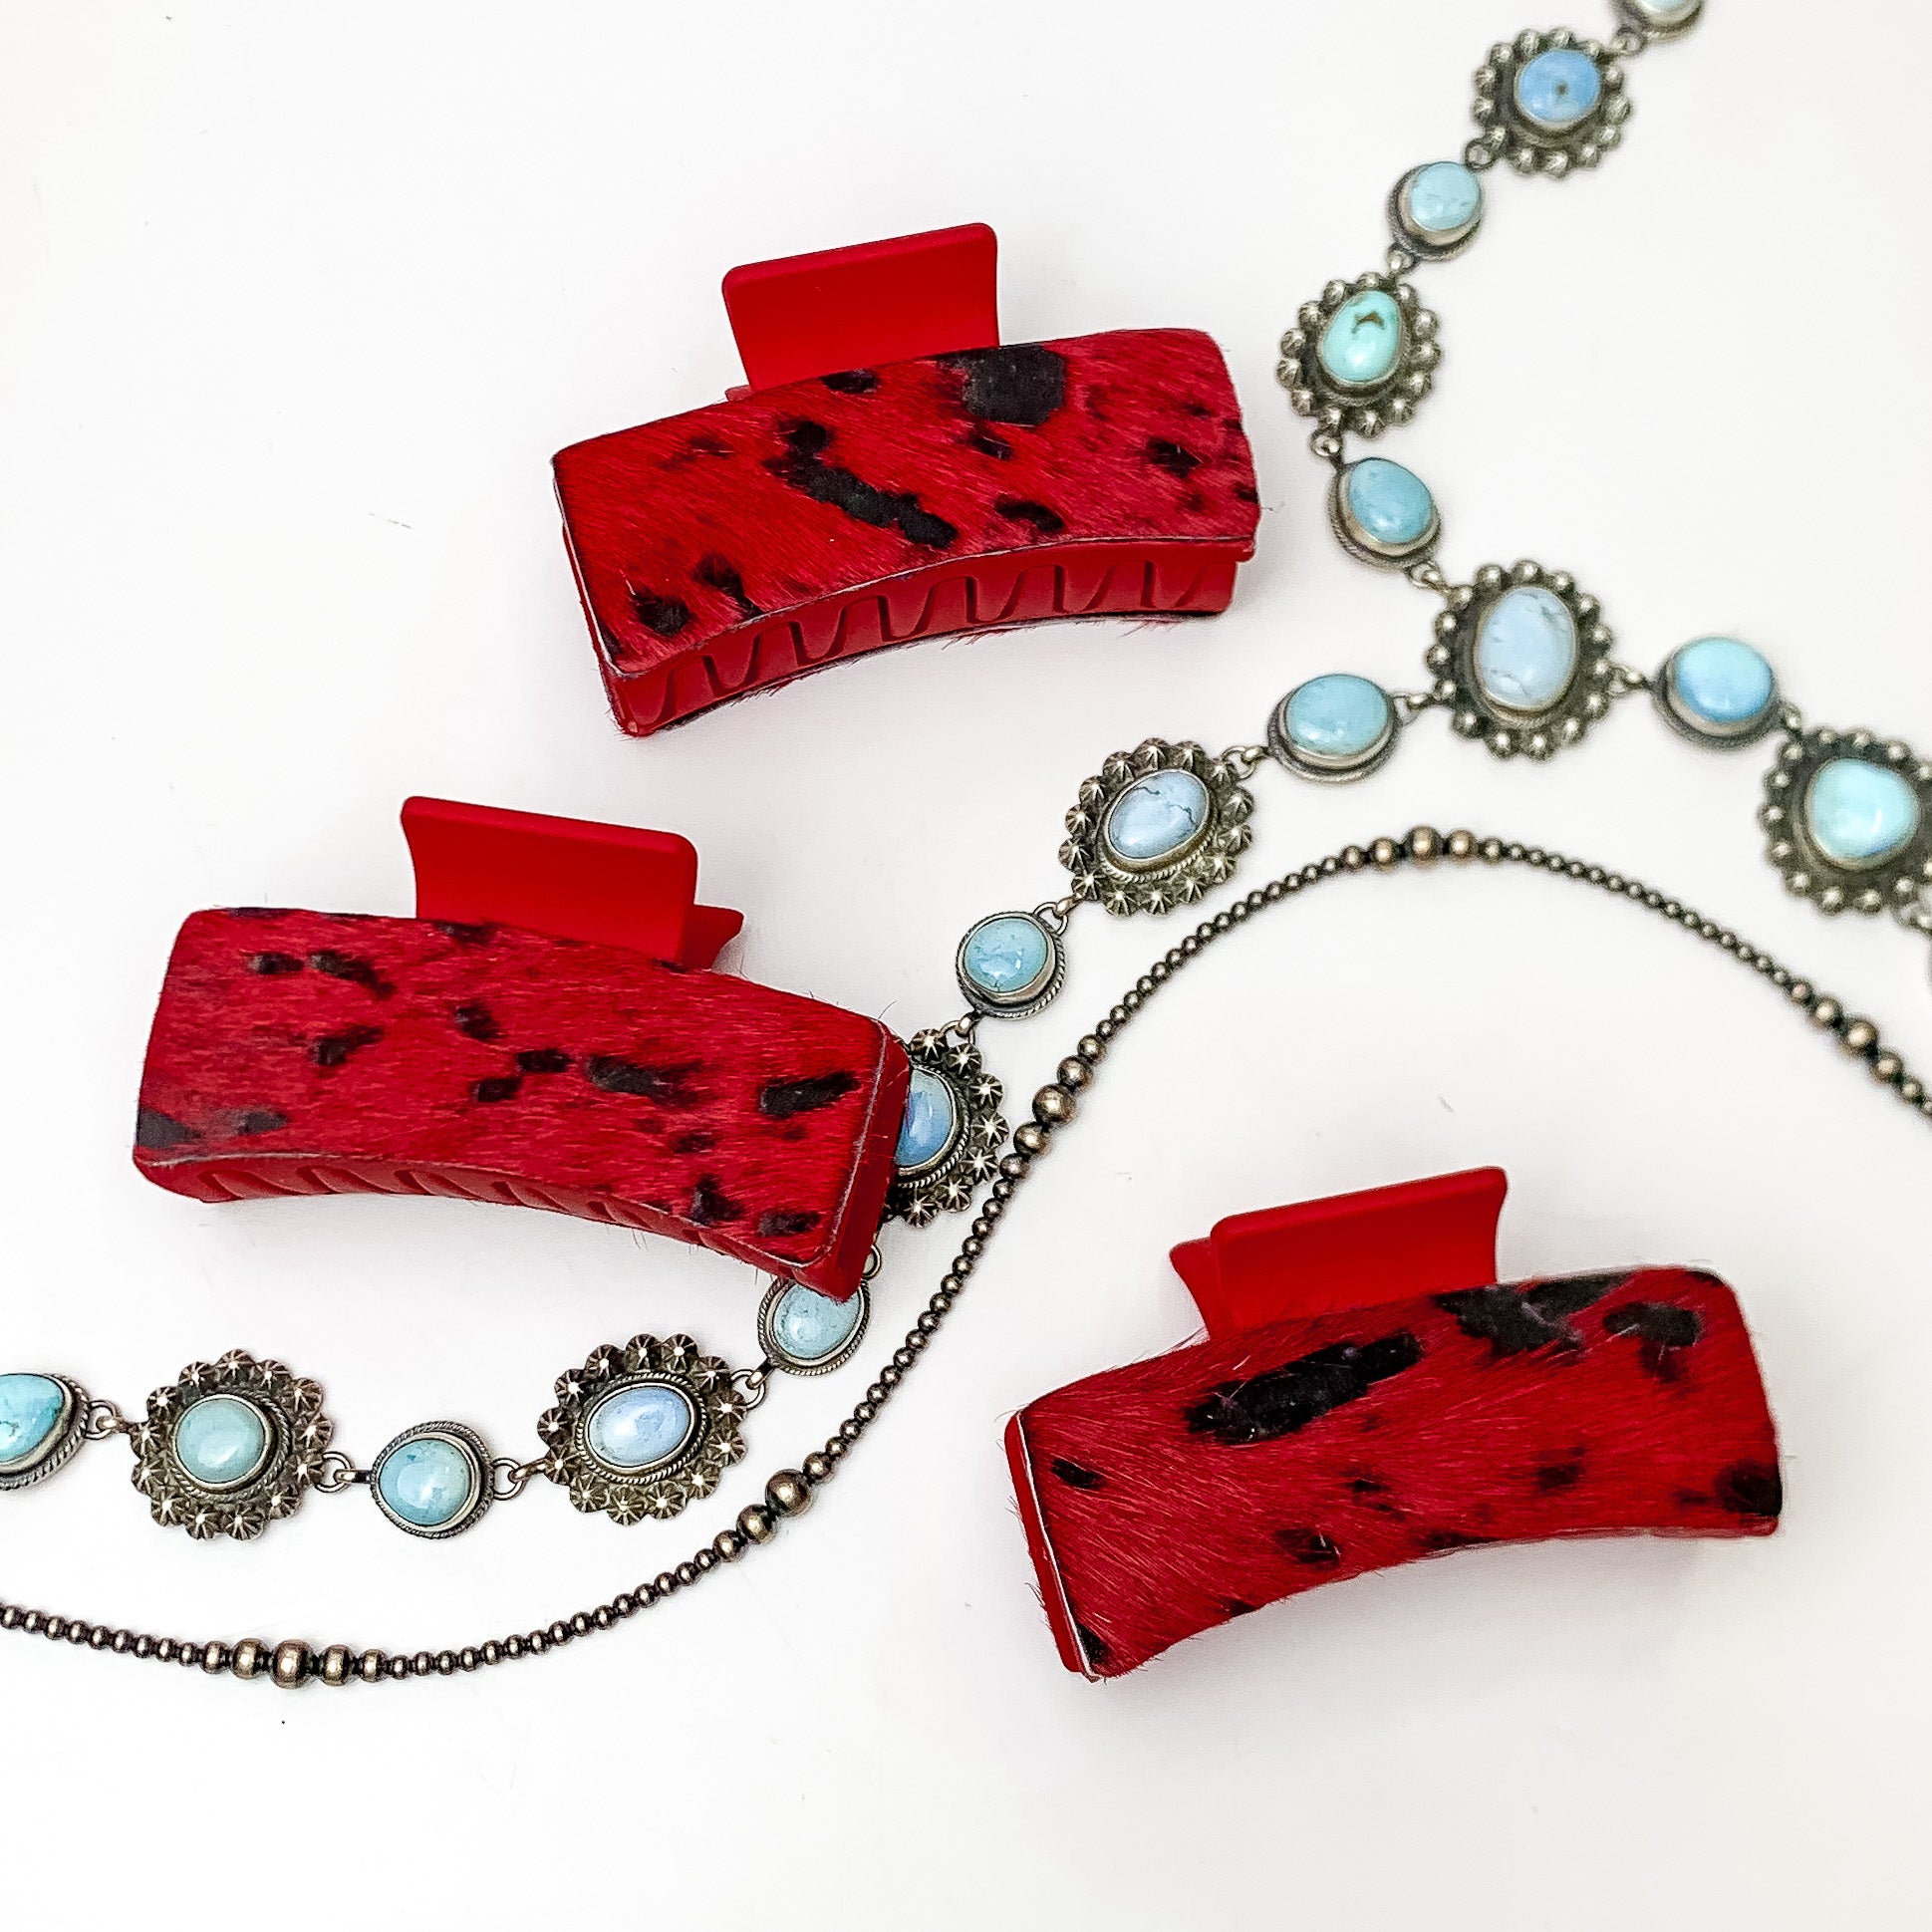 Pictured are three red hair clips with red and black hide patches. These earrings are pictured on a white background with silver necklaces under the clips. 